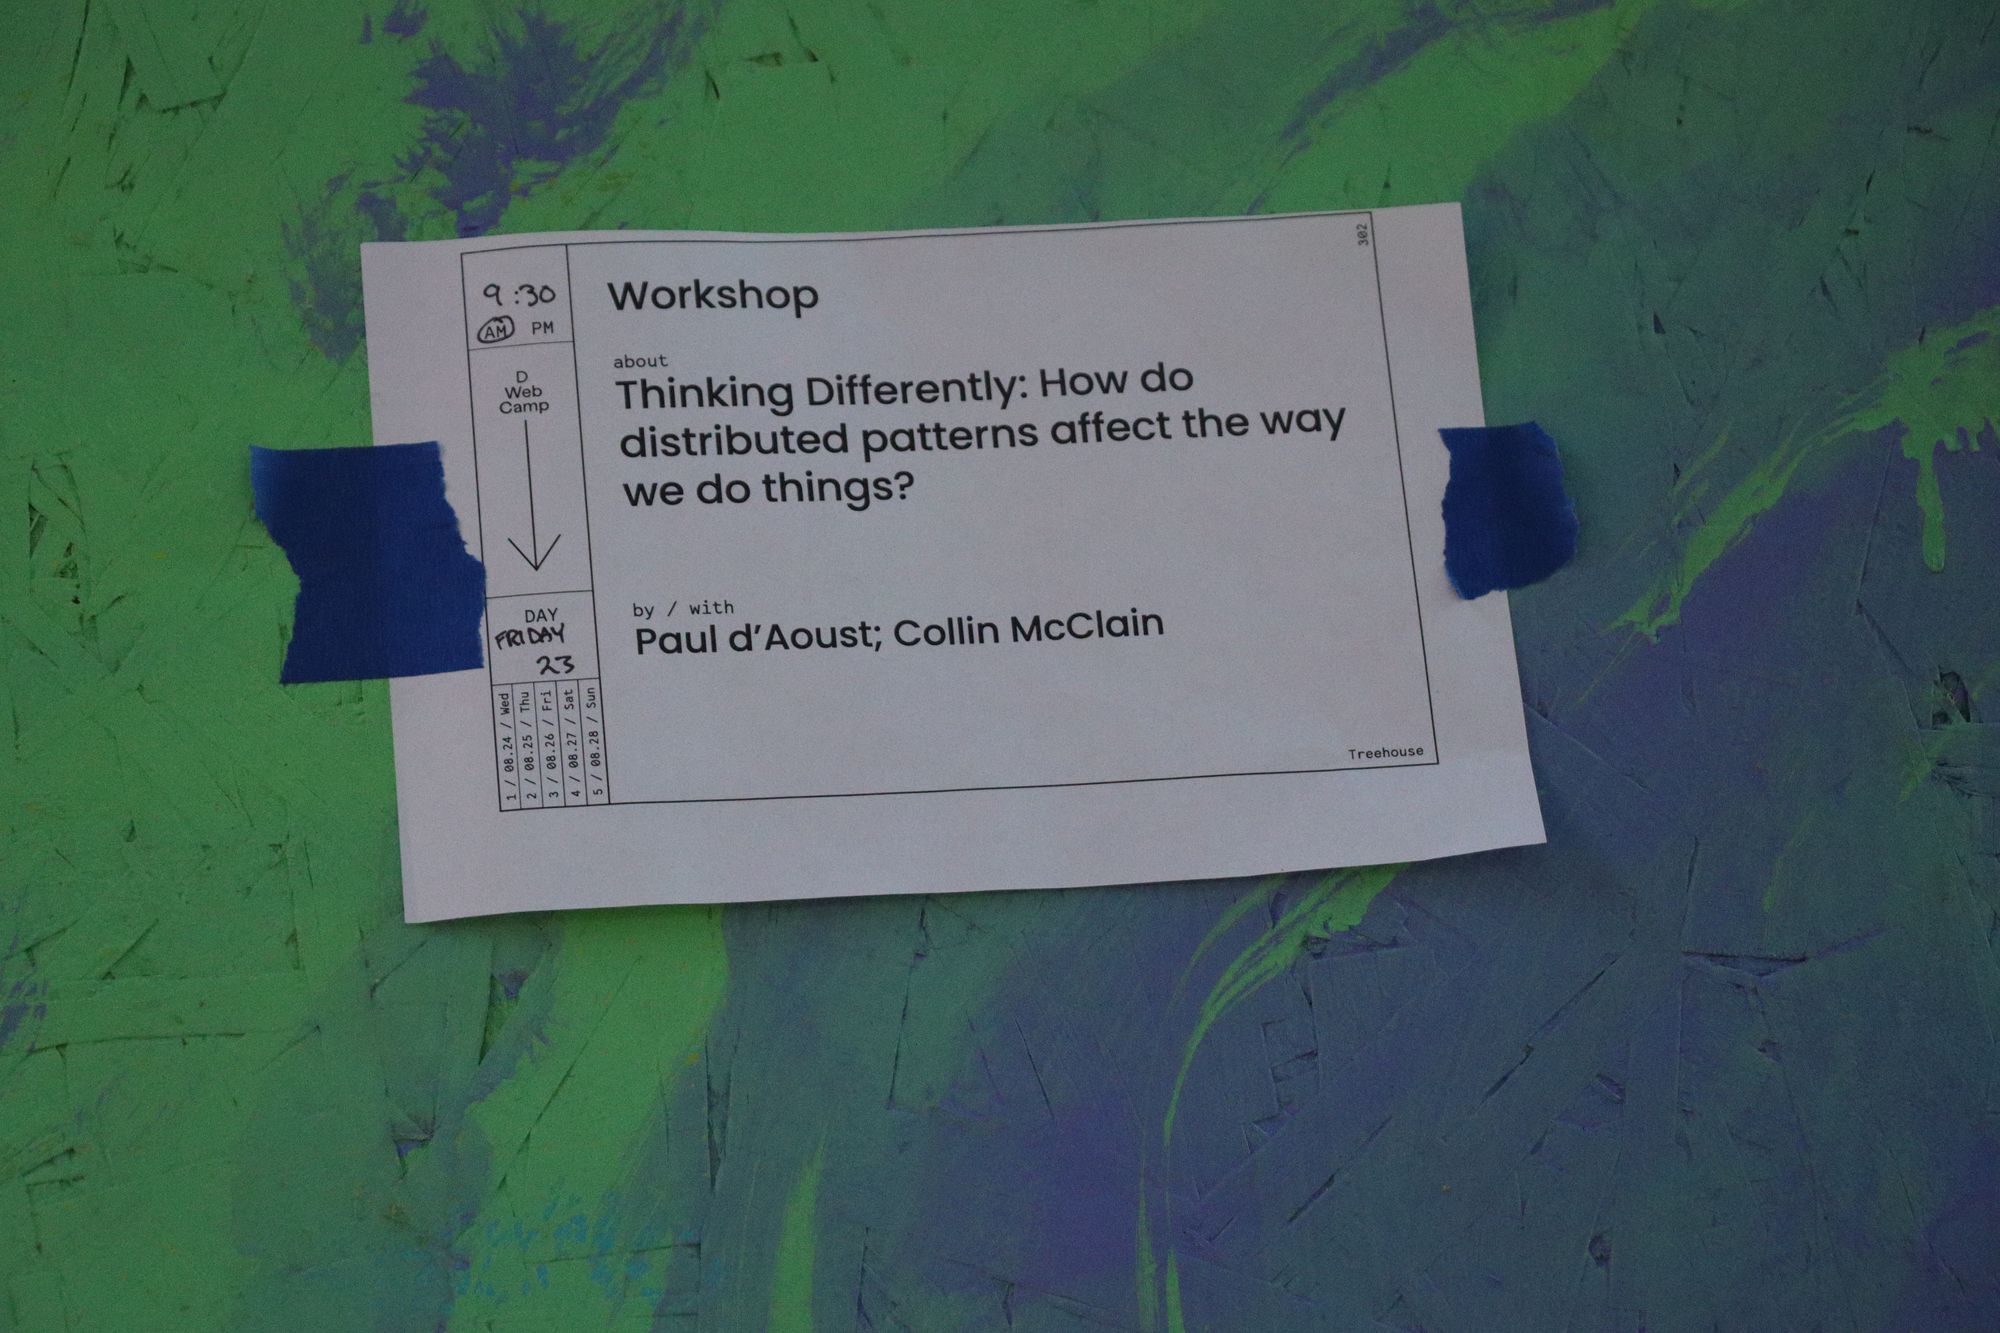 A schedule card which reads ‘Workshop: Thinking Differently: How do distributed patterns affect the way we do things?’